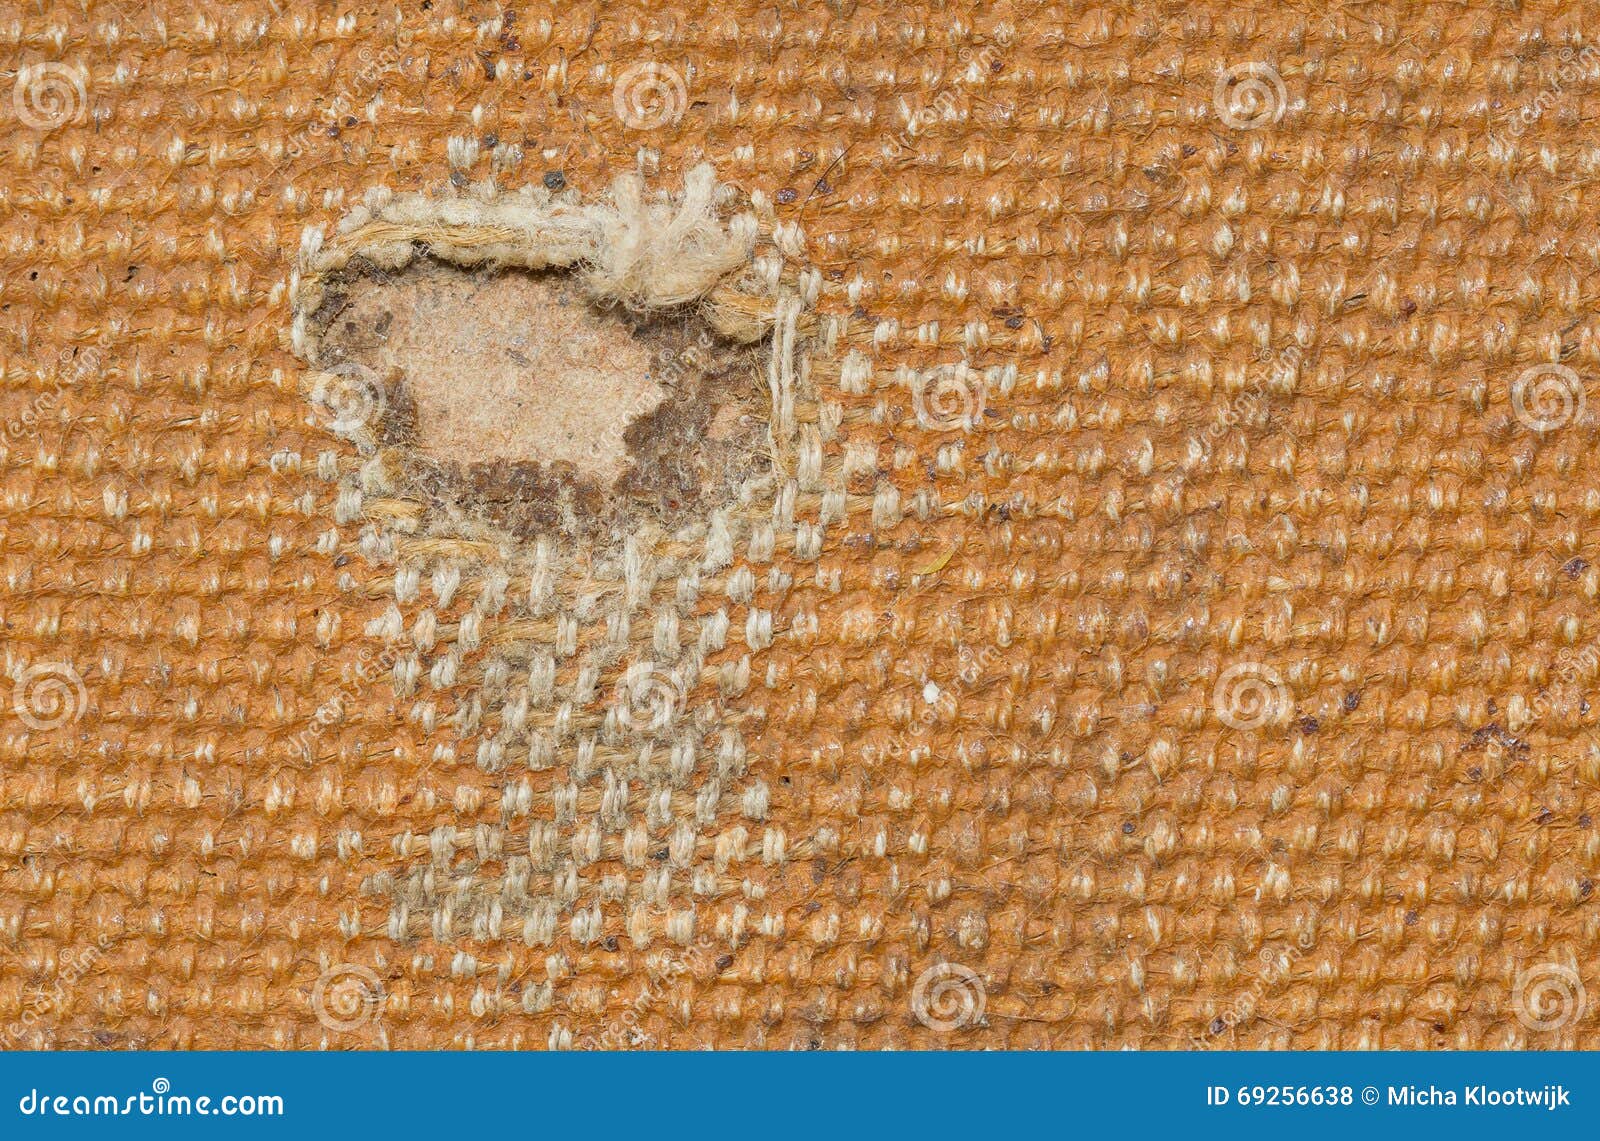 Detail (damage) of an Old Canvas Suitcase, Close-up Stock Photo - Image ...